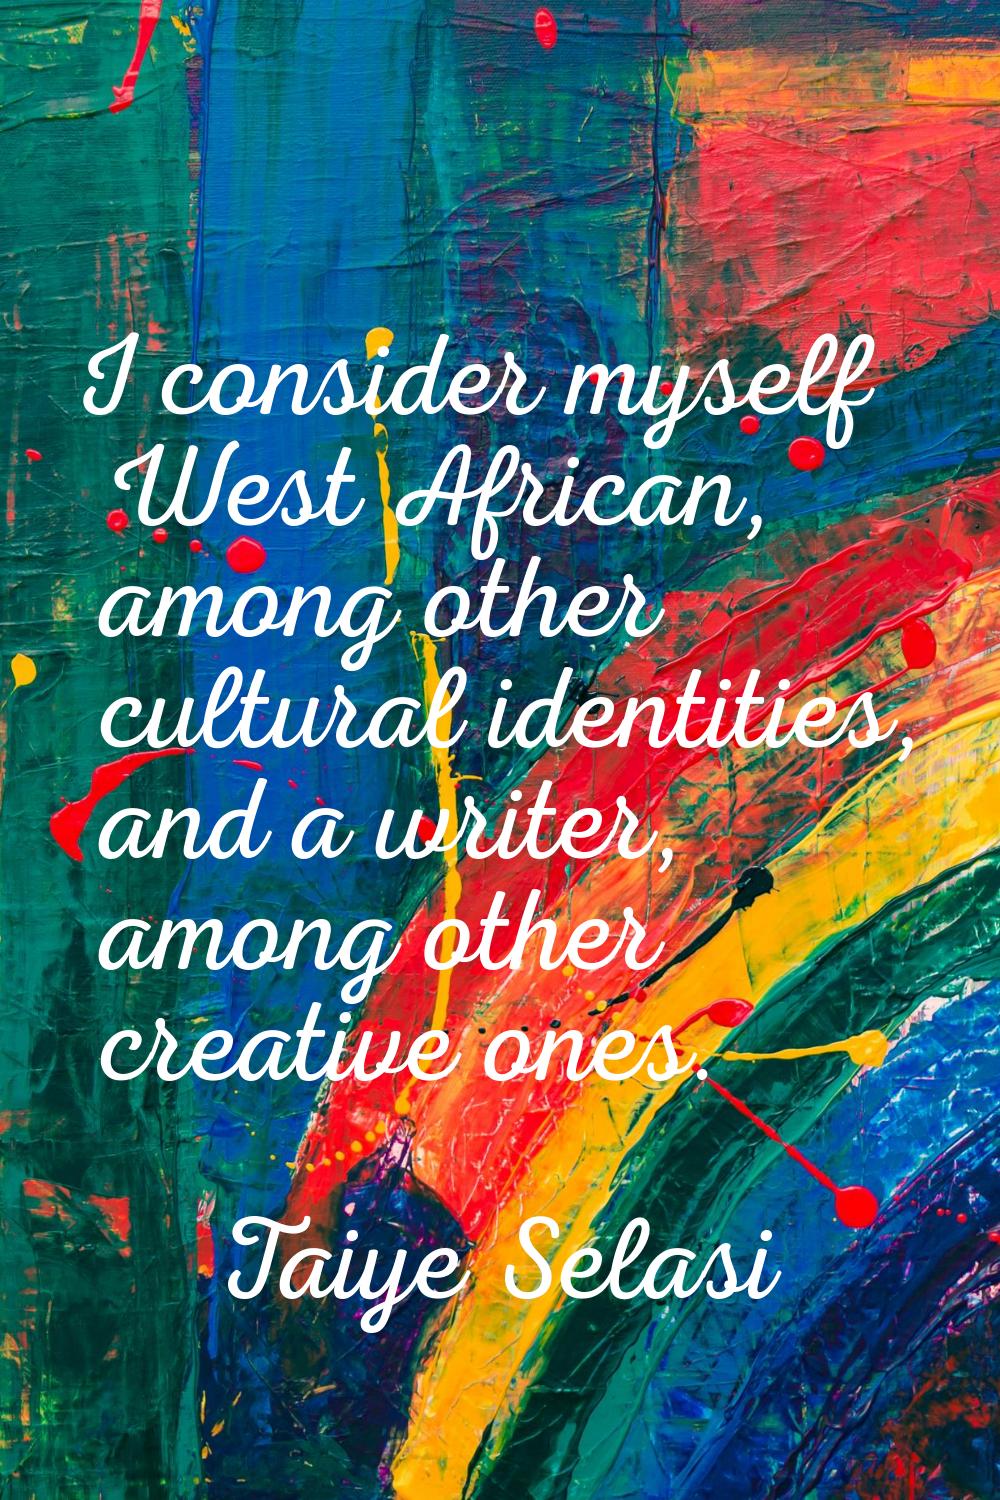 I consider myself West African, among other cultural identities, and a writer, among other creative